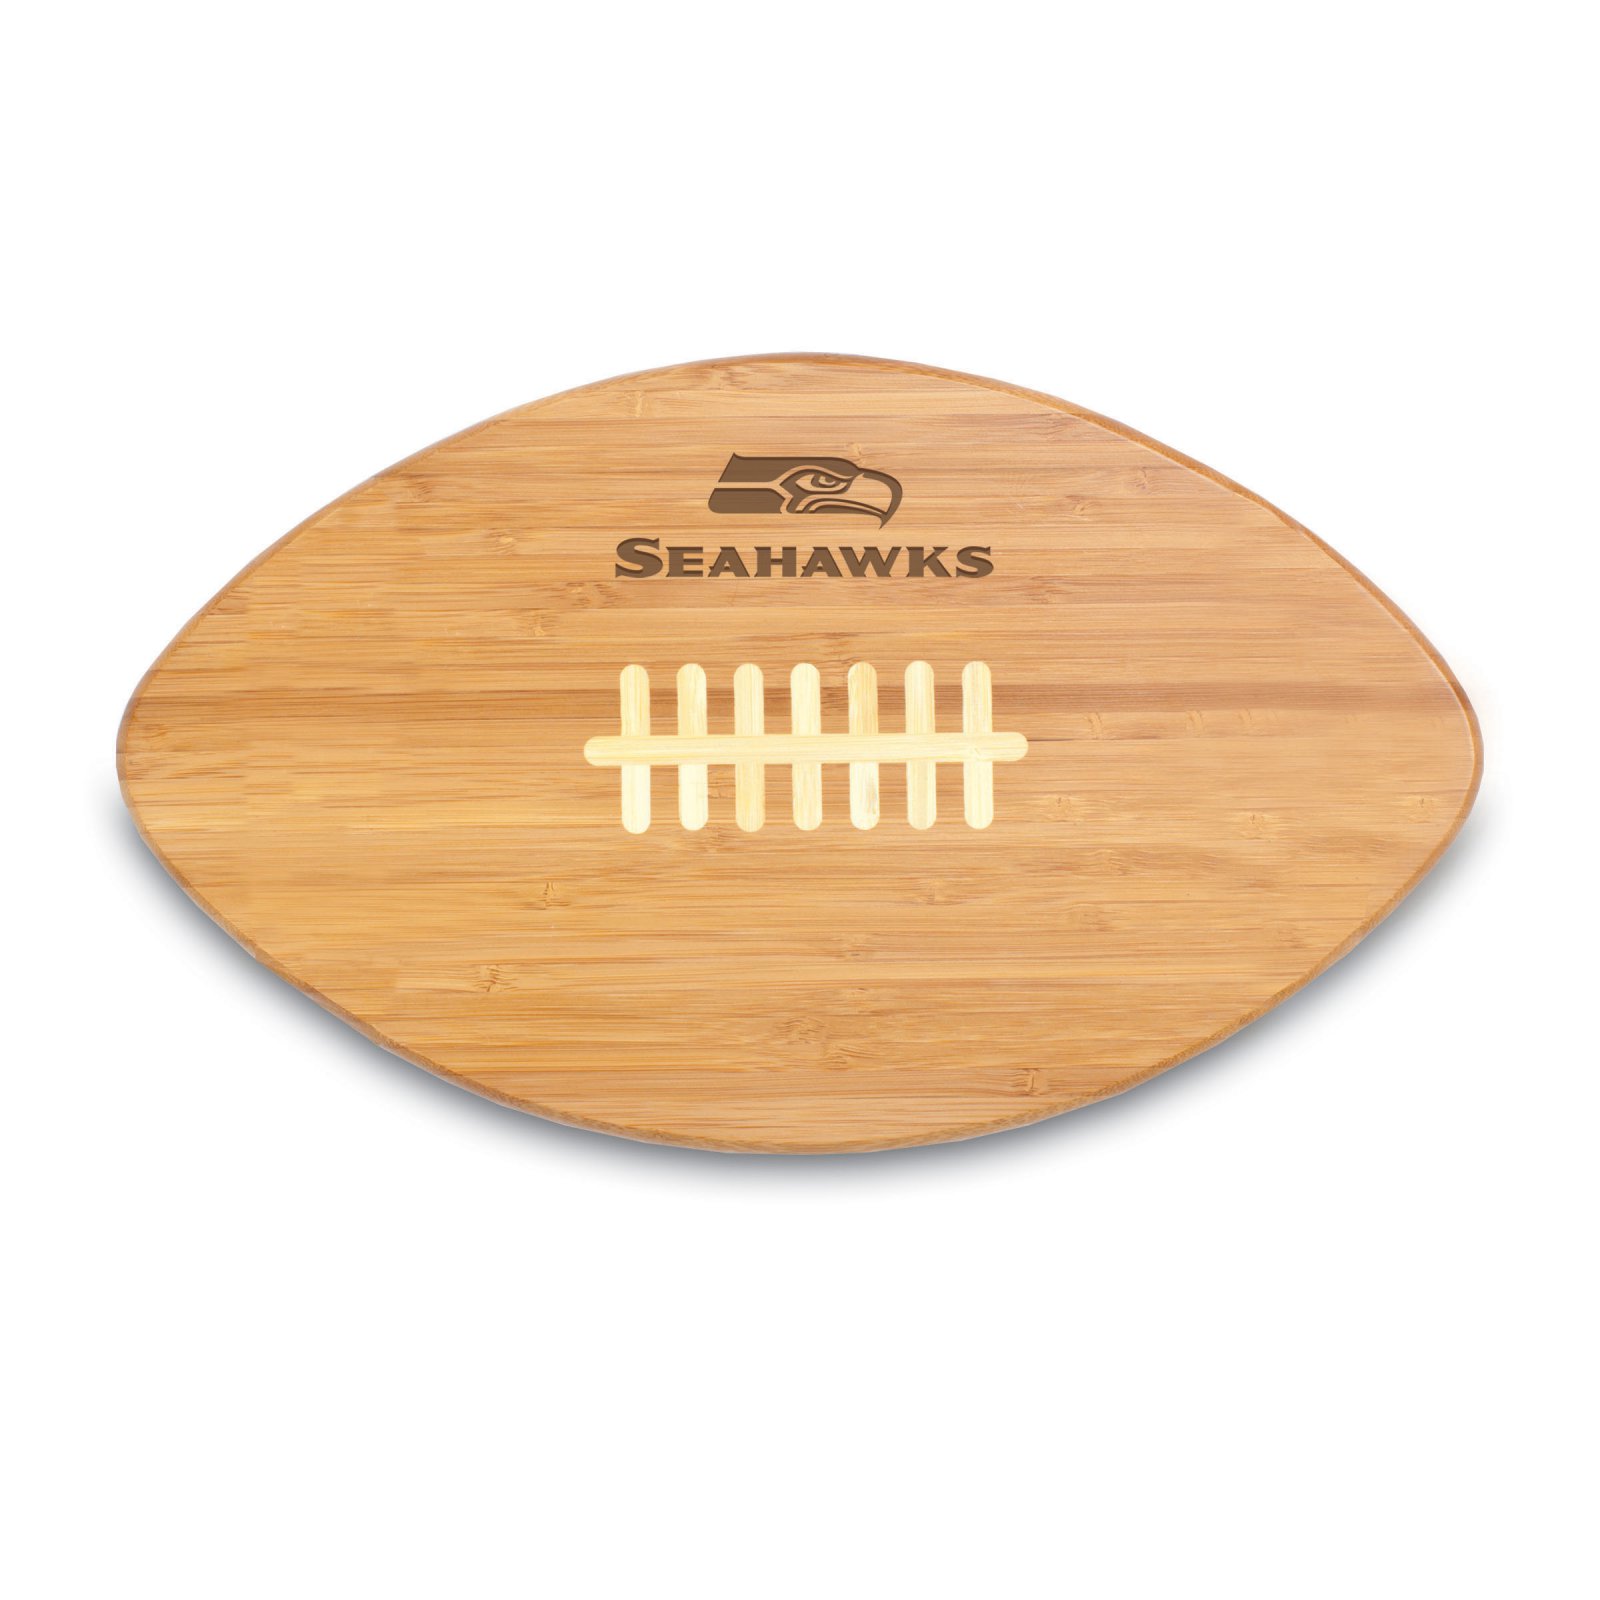 New York Jets Football Cutting Board - image 4 of 5